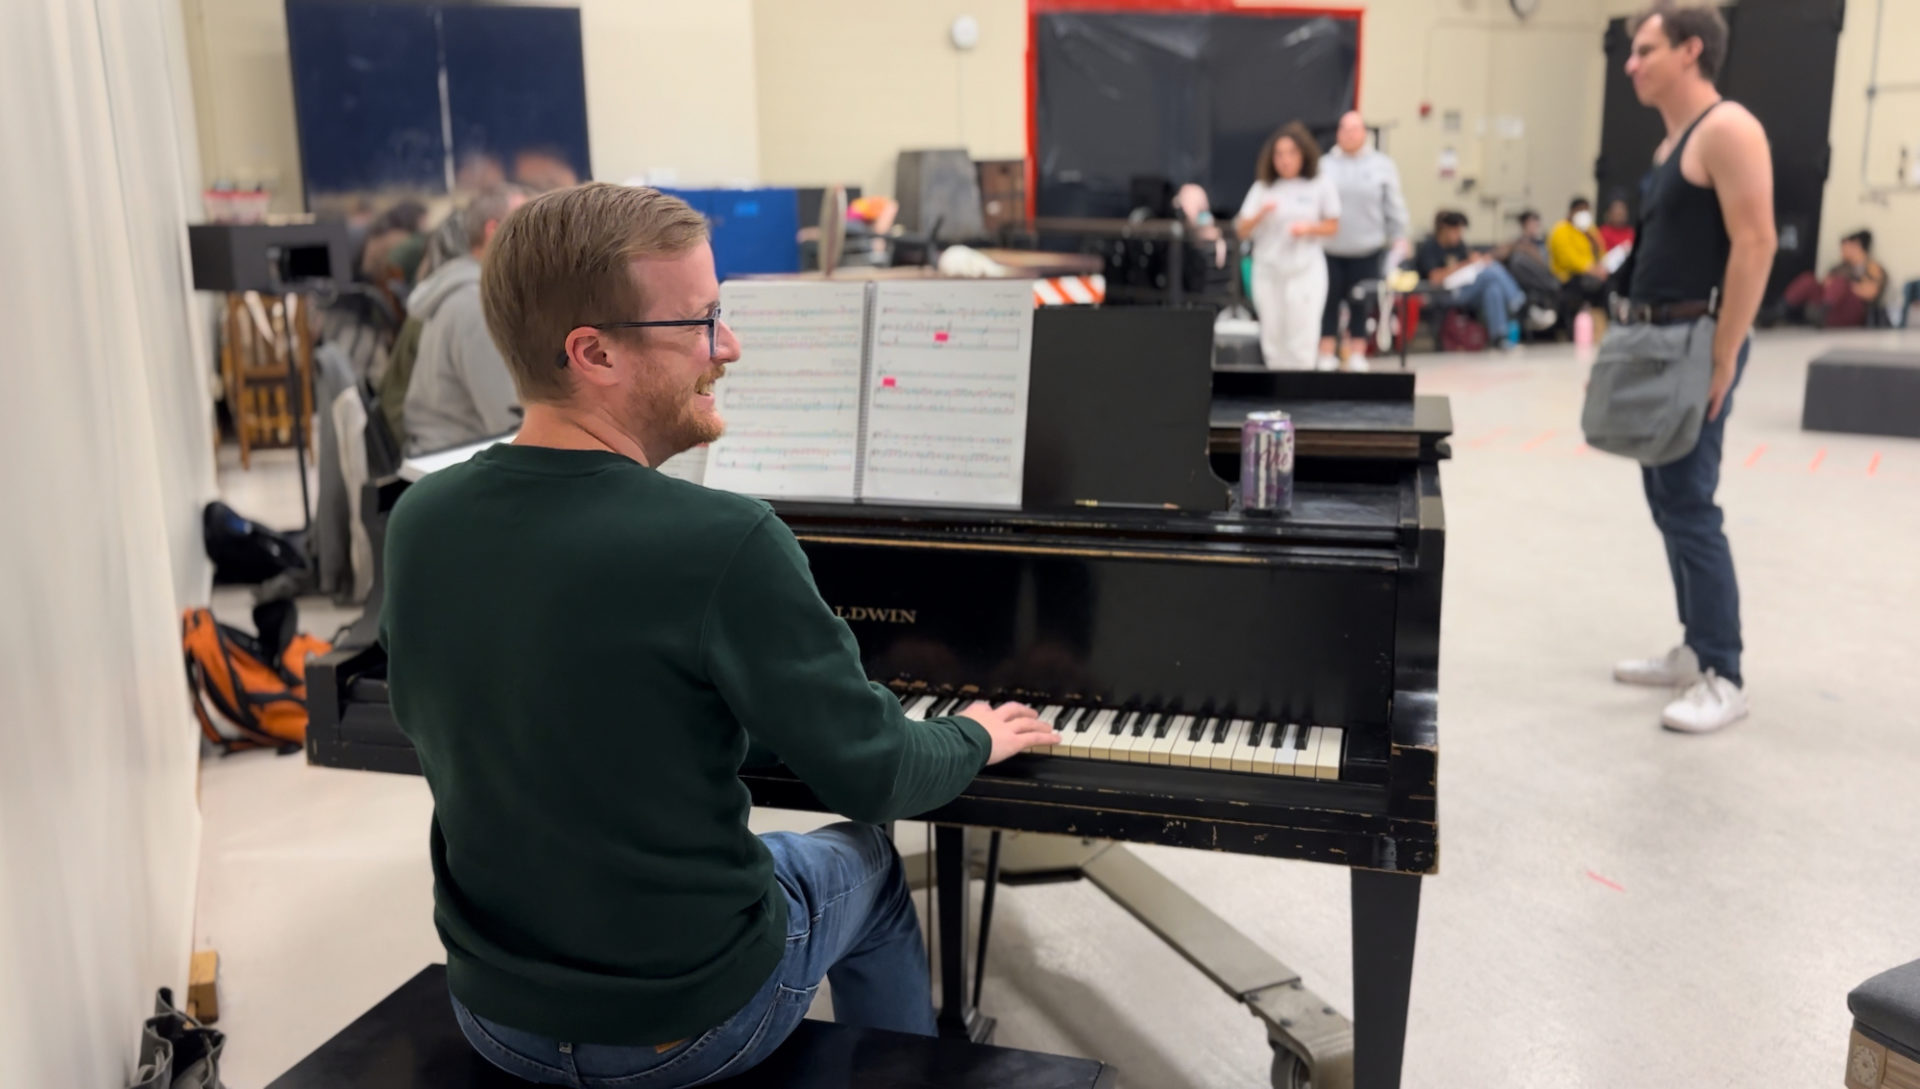 Justin Brauer, a white man with light hair and glasses, sits at a piano in a rehearsal space